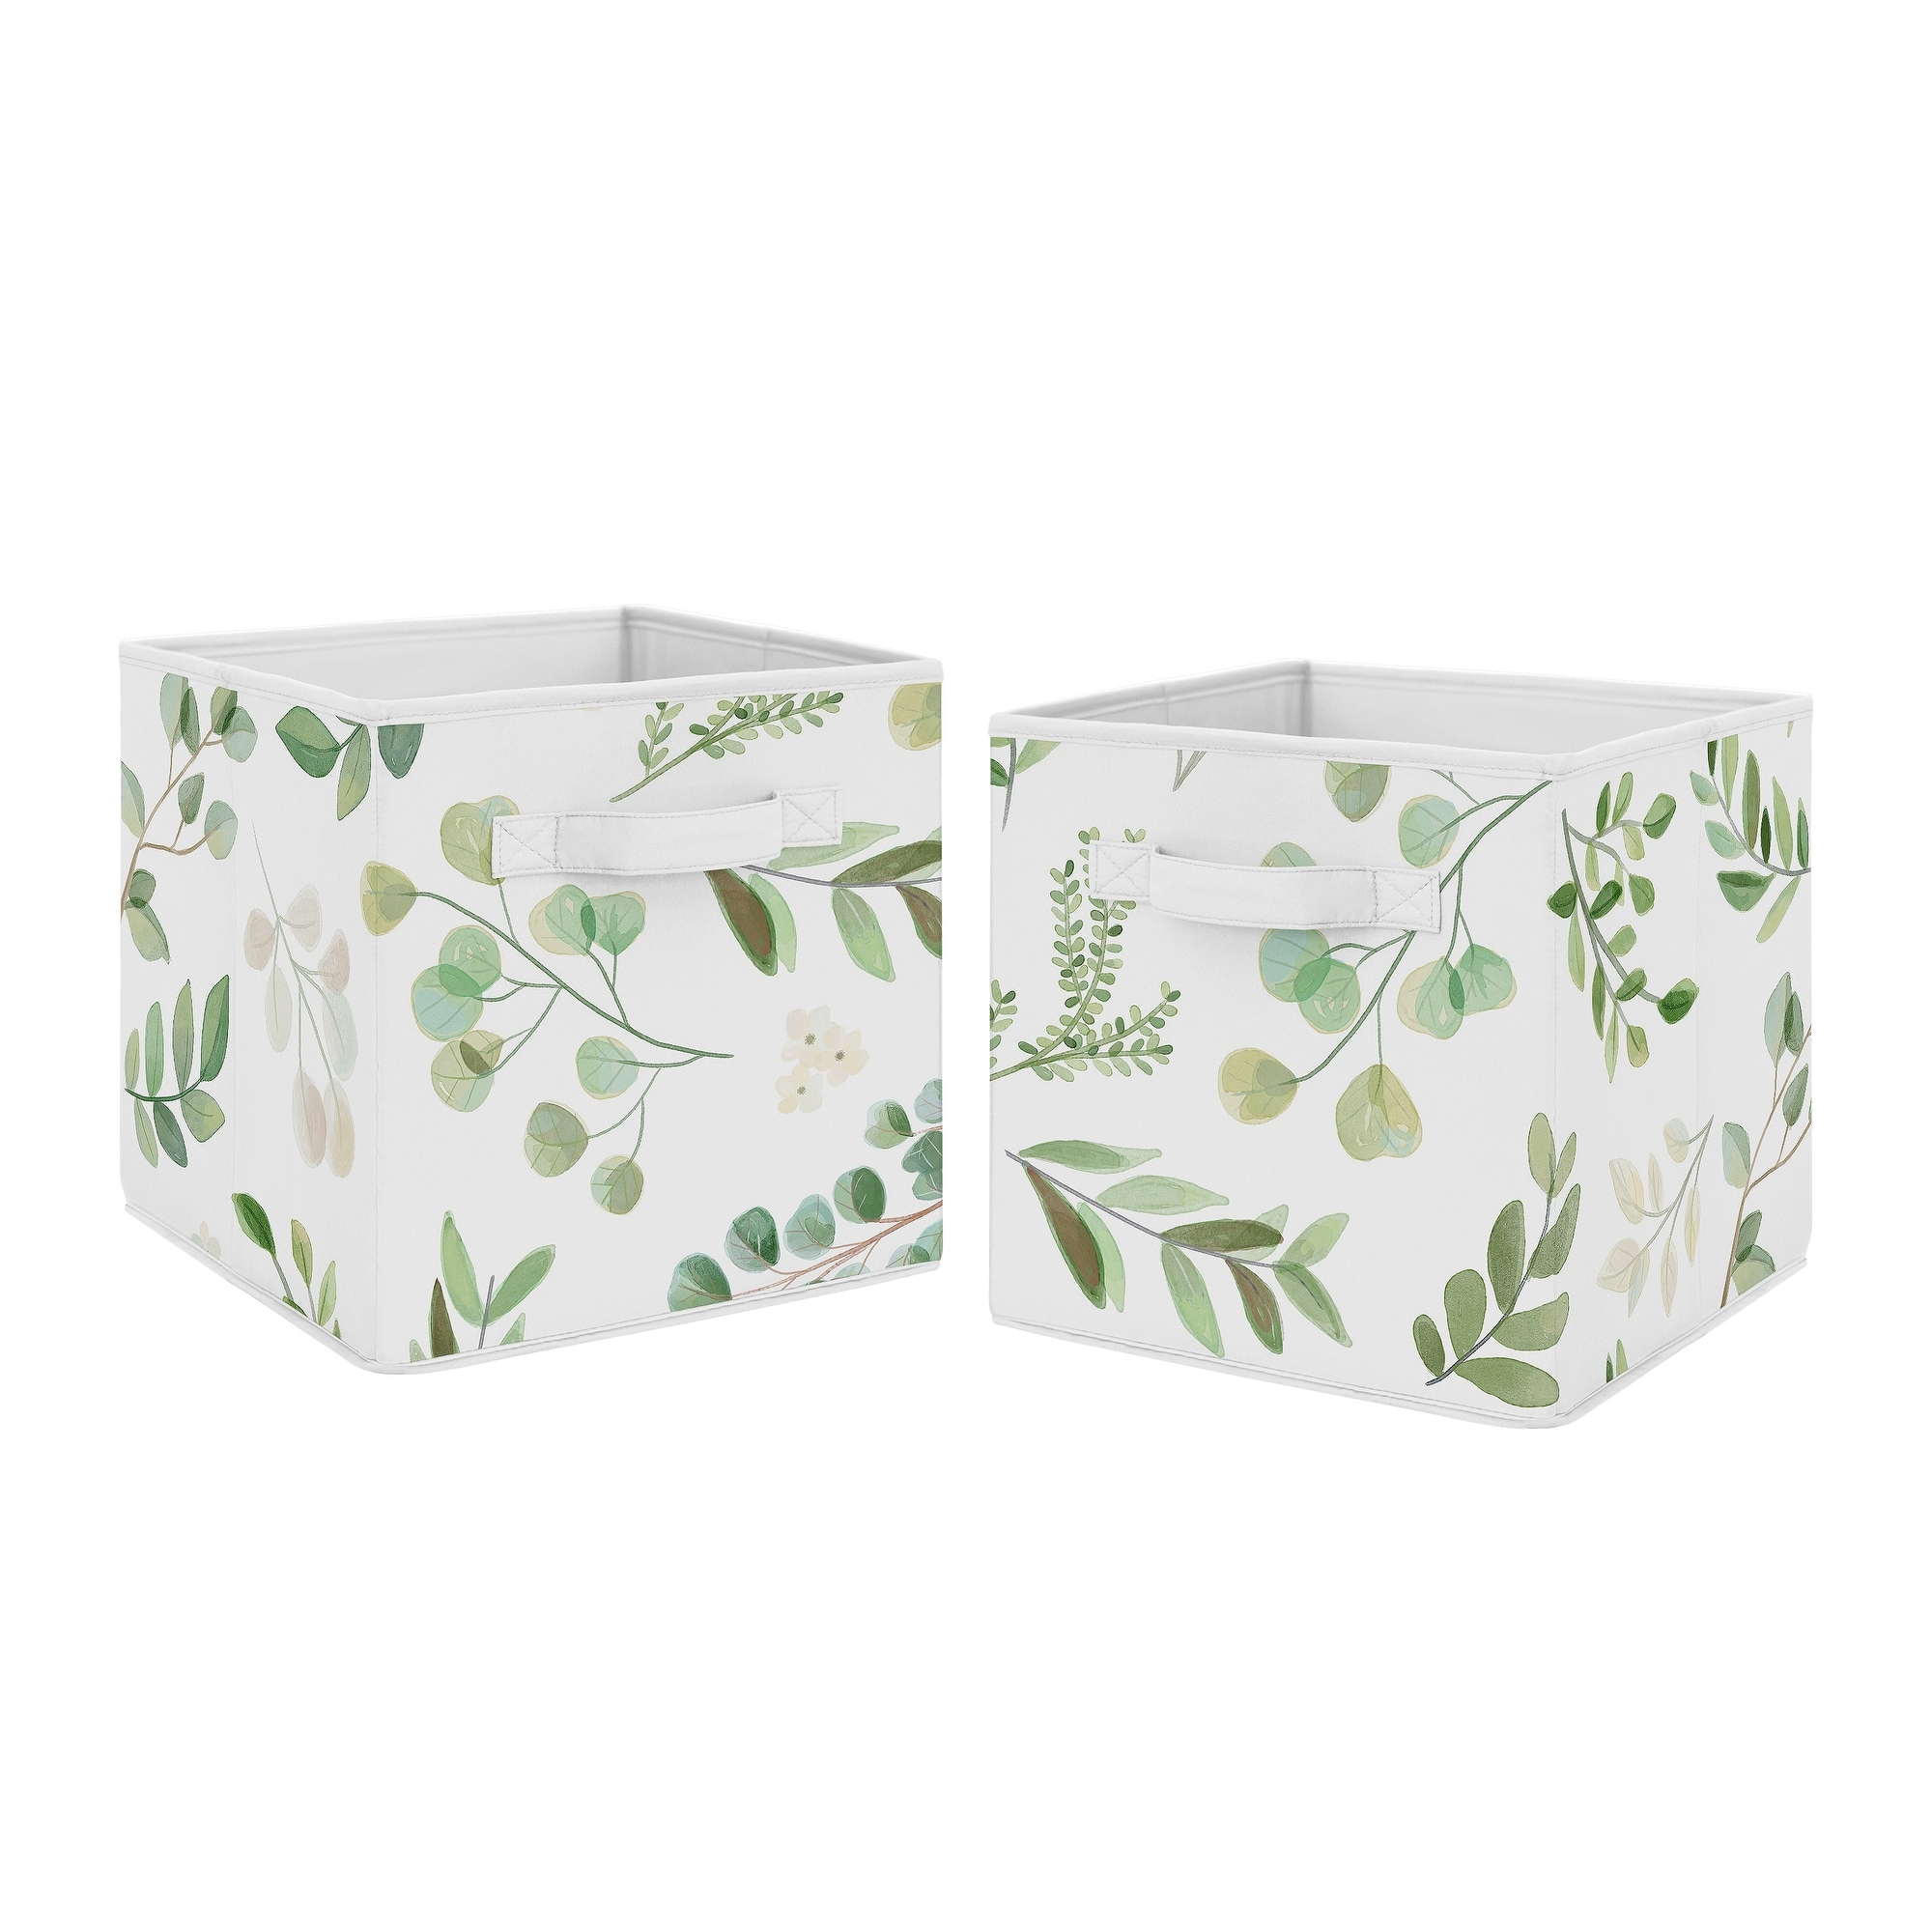 https://ak1.ostkcdn.com/images/products/is/images/direct/3a06f0696a268289114499ad47999a0106107589/Floral-Leaf-Collection-Foldable-Fabric-Storage-Bins---Green-and-White-Boho-Watercolor-Botanical-Woodland-Tropical-Garden.jpg